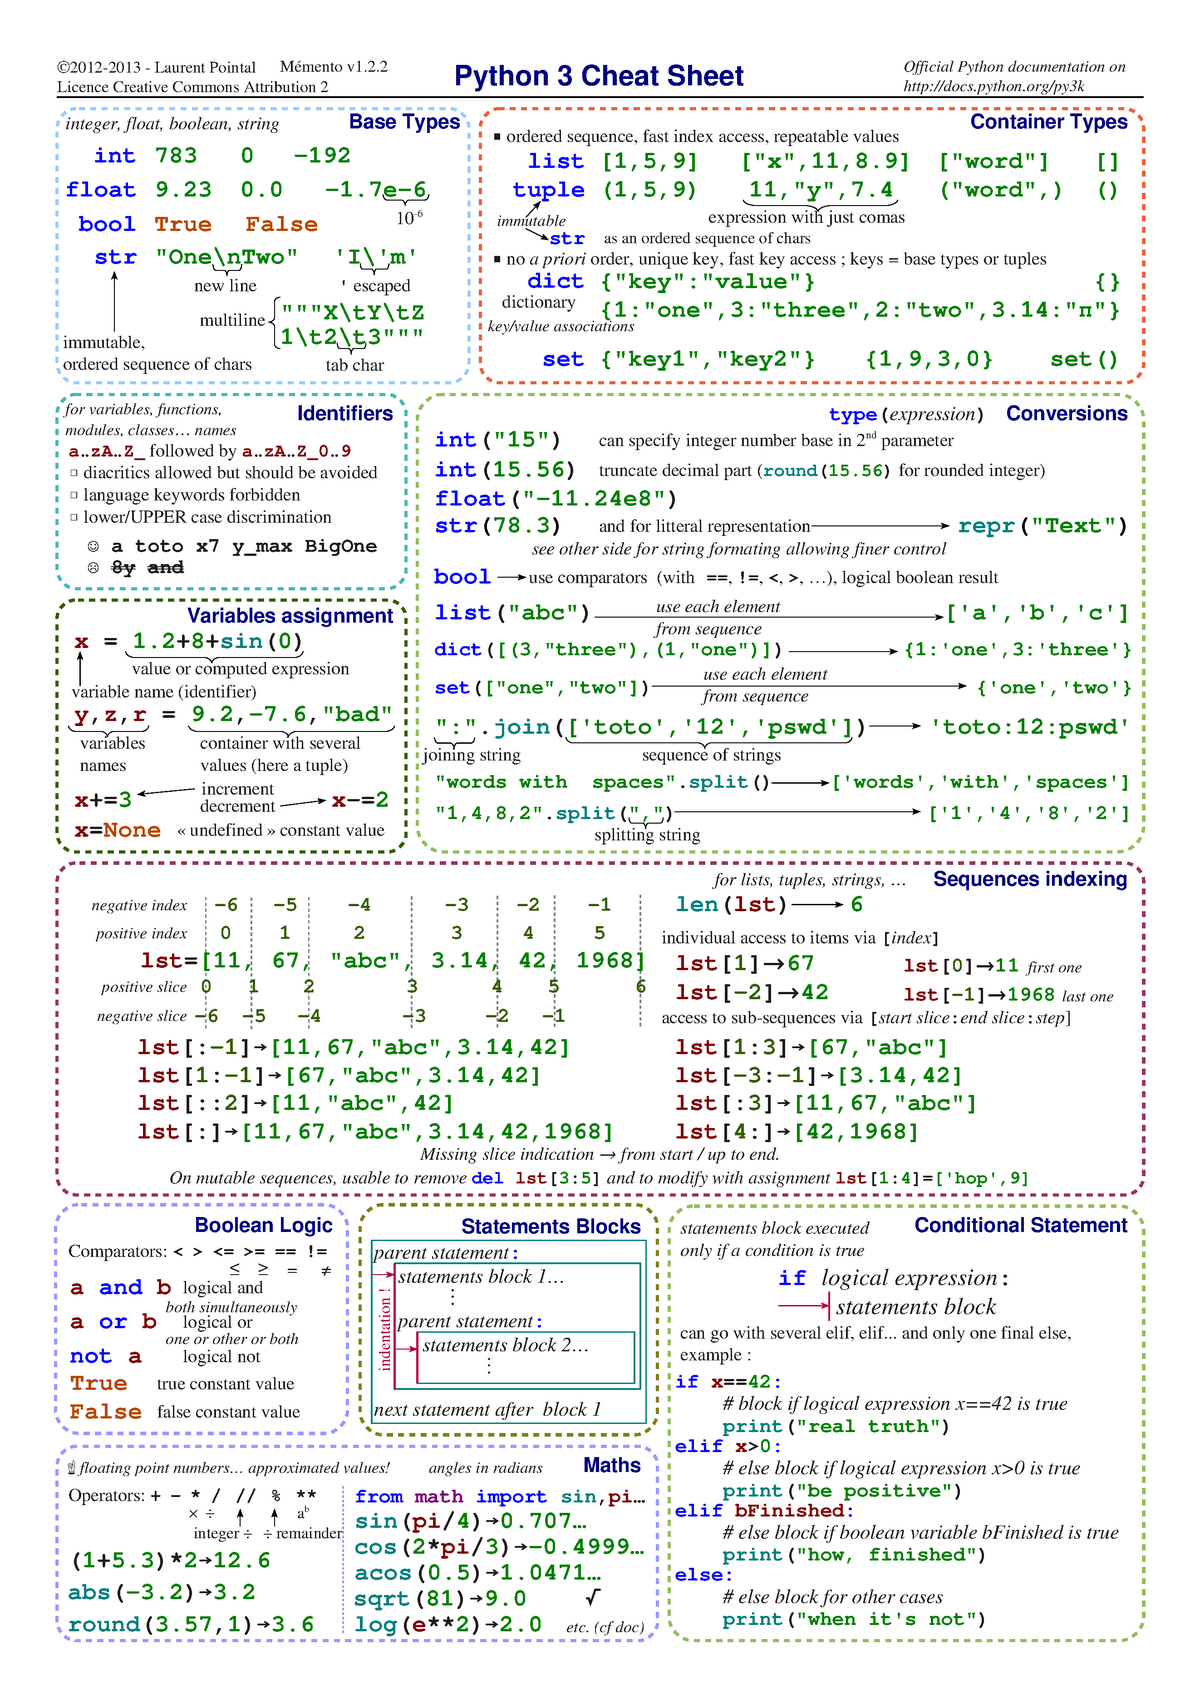 Python Cheat Sheet V12 Laurent Pointal Licence Creative Commons